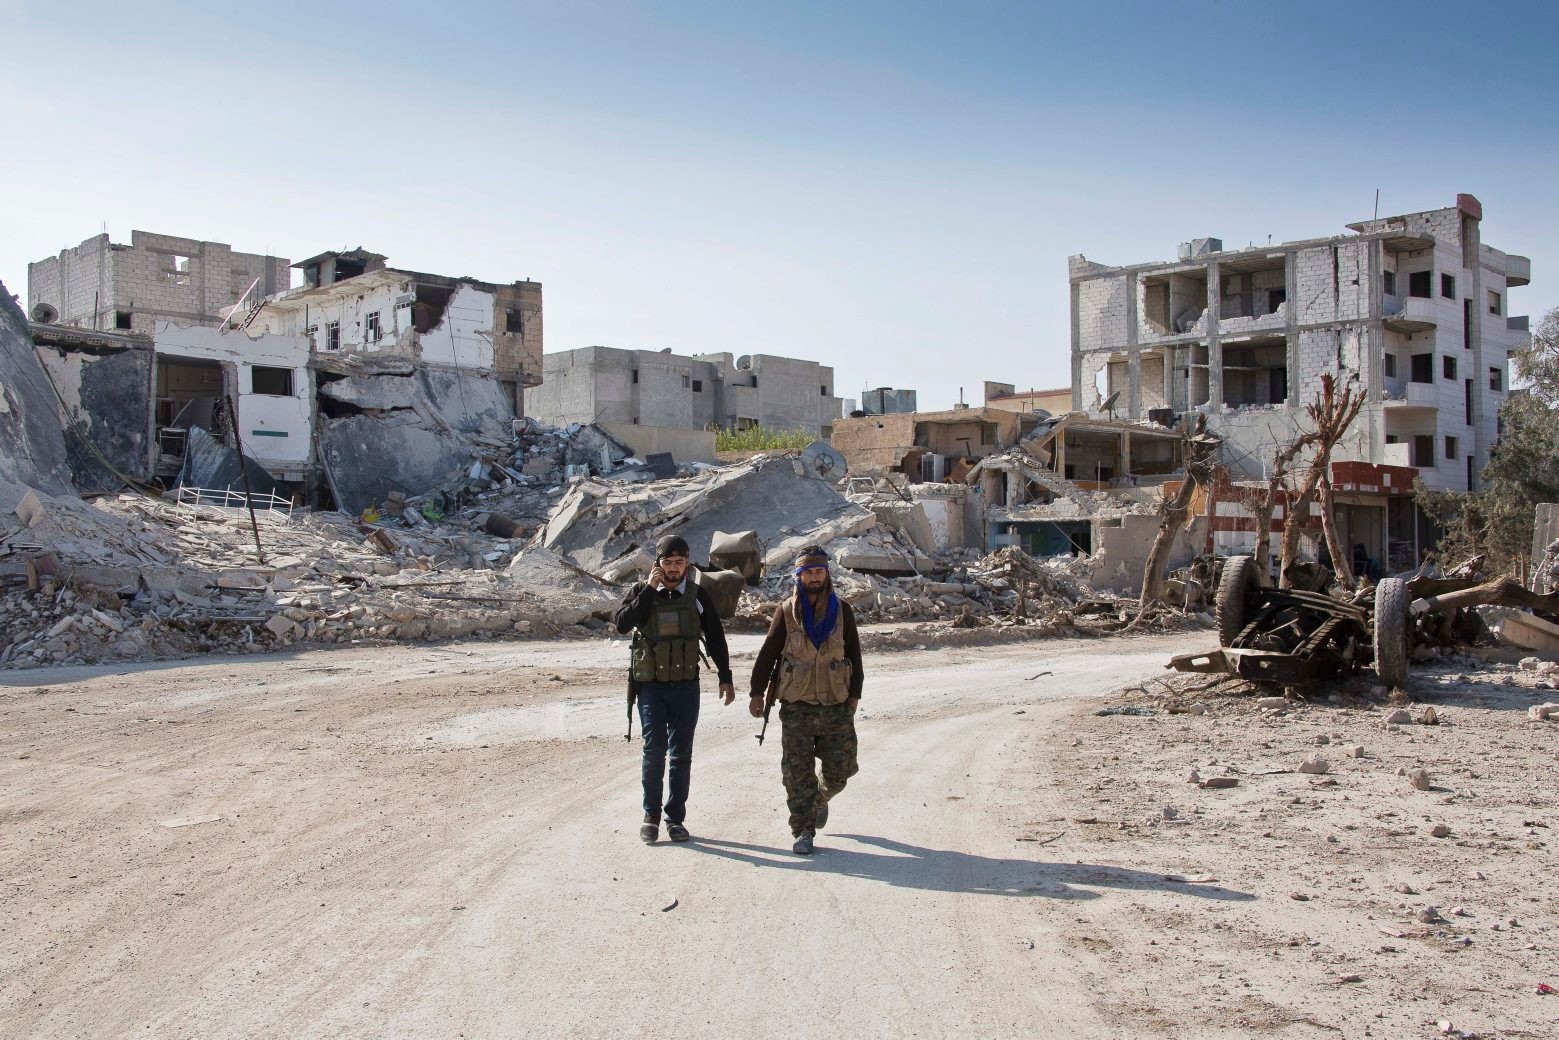 FILE - In this Nov. 19, 2014 file photo, Kurdish People's Protection Units (YPG) soldiers walk near the town entrance circle heading to their strongholds in Kobani, Syria. Amnesty International said the U.S.-backed Kurdish administration in northern Syria has deliberately displaced thousands of mainly Arab citizens and demolished homes. The report released Tuesday, Oct. 13, 2015, said that the abuses, which amount to war crimes, were often carried out in retaliation for residents' perceived sympathies for or ties to the Islamic State group or other militants. (AP Photo/Jake Simkin, File) Mideast Syria Displaced By Kurds